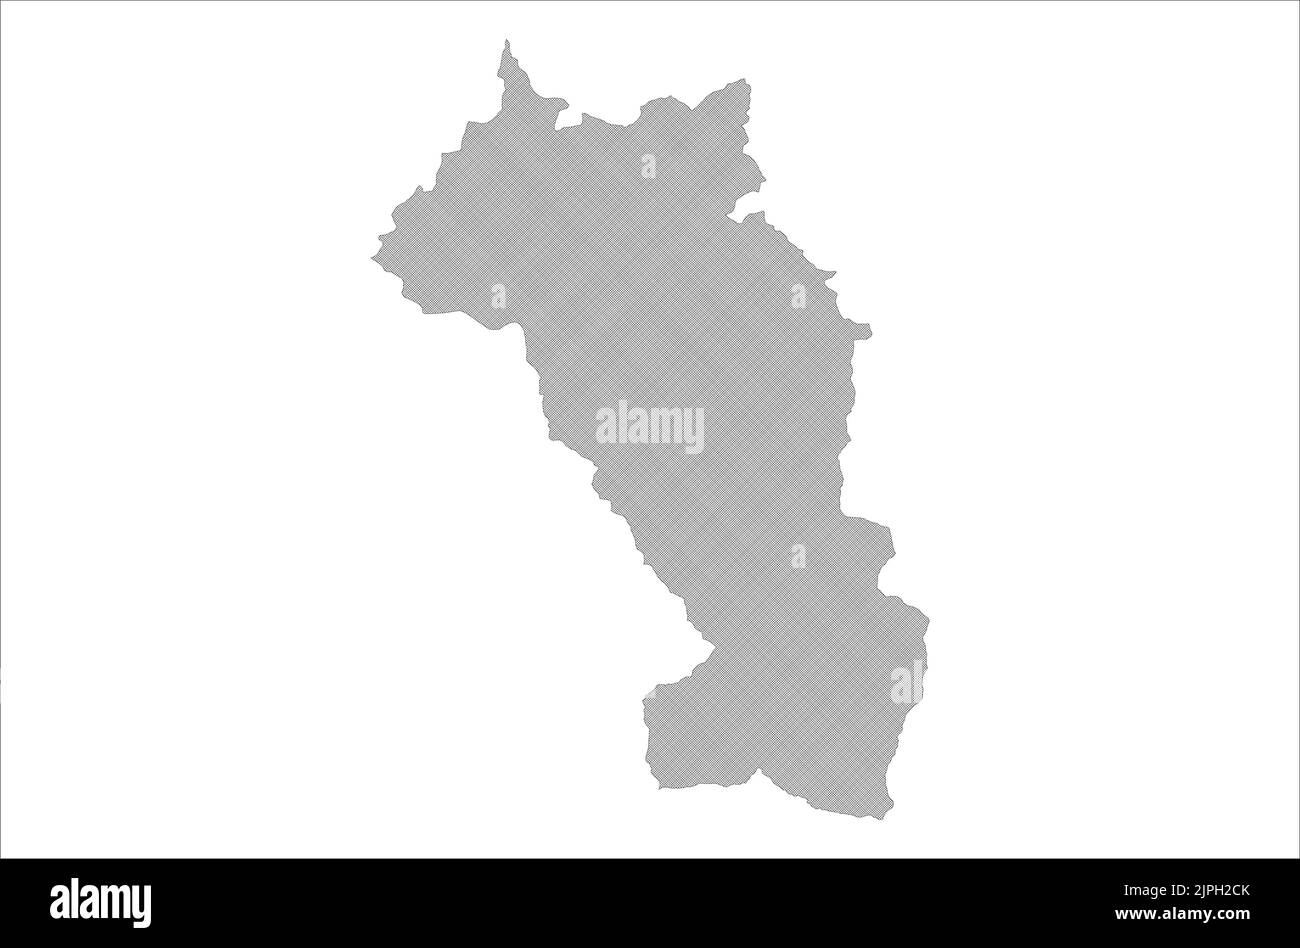 Paro state of Bhutan Vector map illustration on white background, seamless colorful map Stock Vector